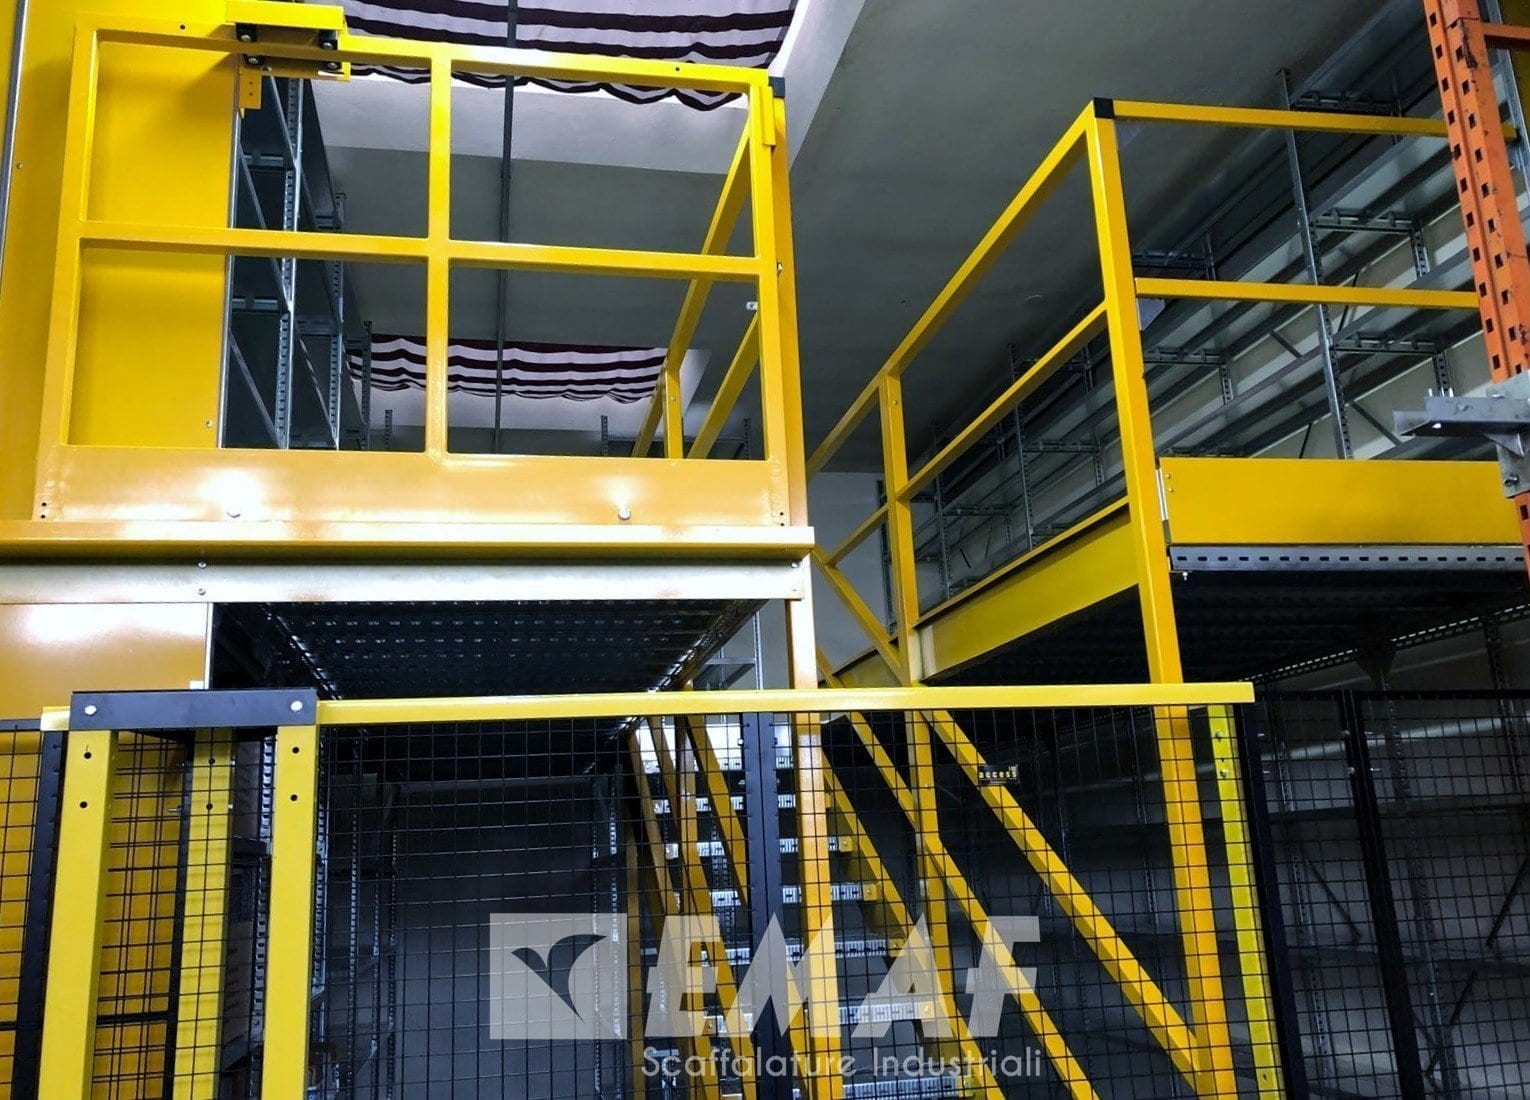 Featured image for “Light-weight metal racking with two levels and a protection barrier”